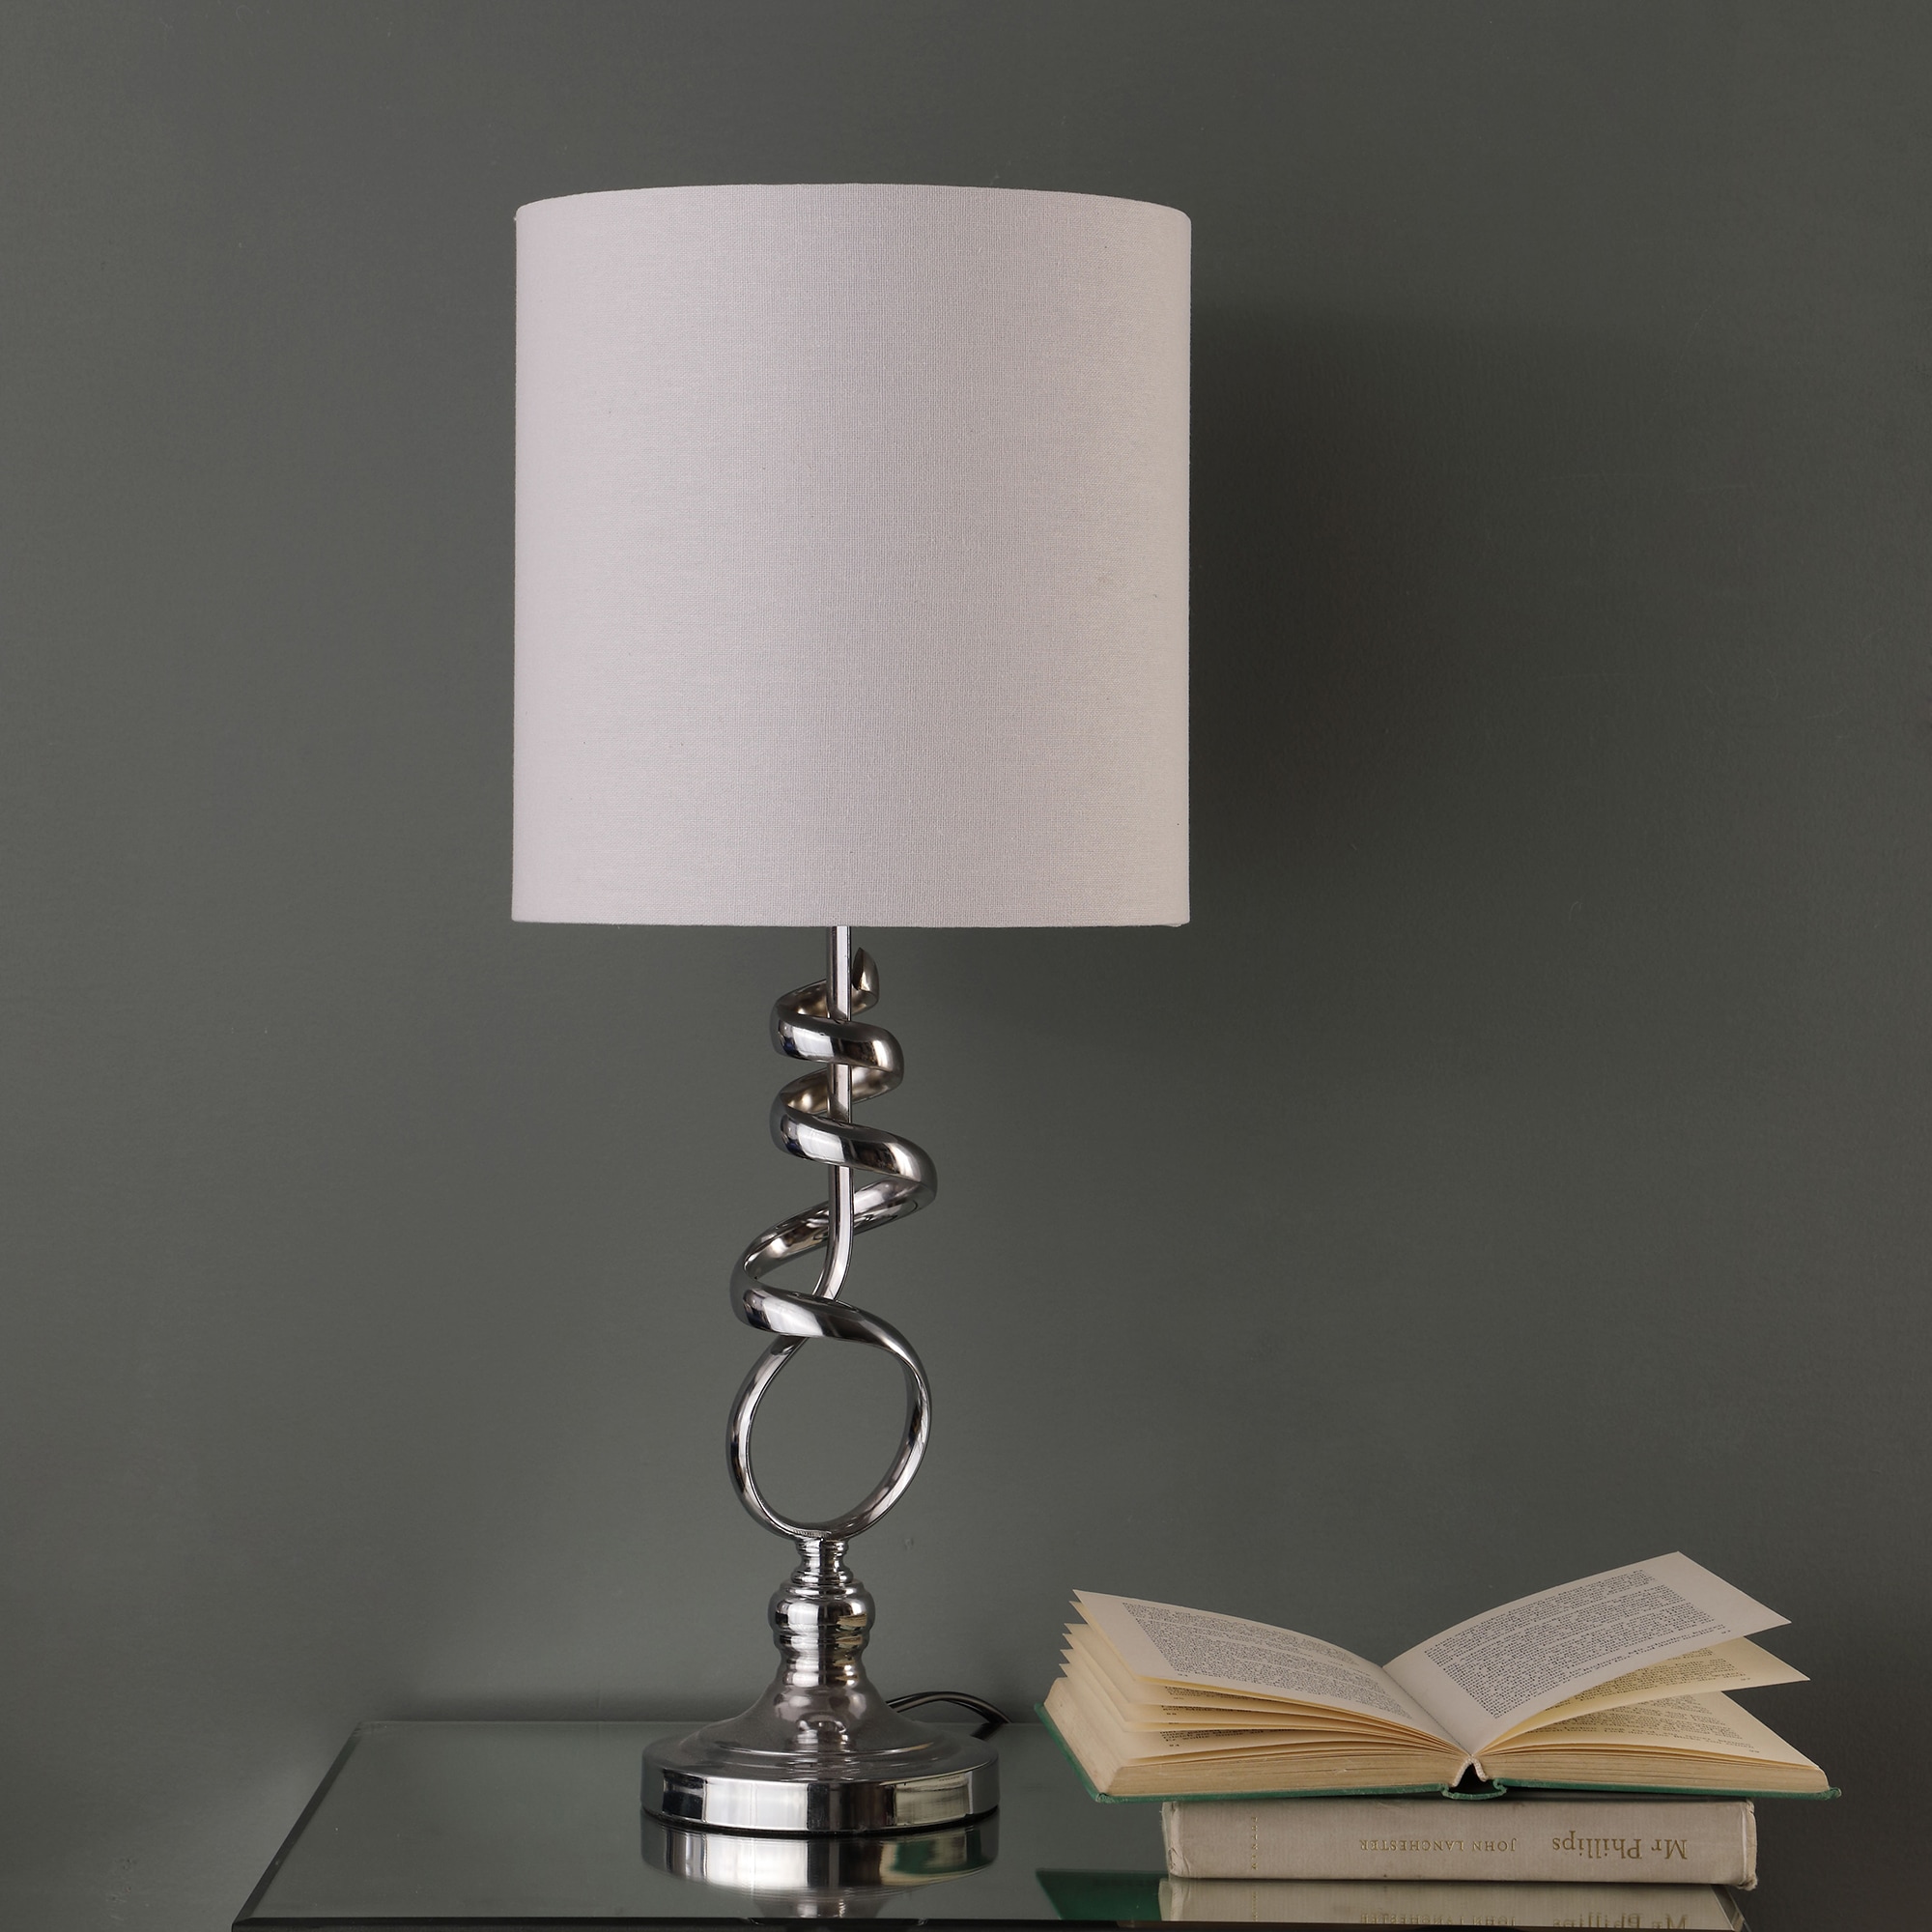 21.5” Table Lamp Set With Night Light And USB Ports